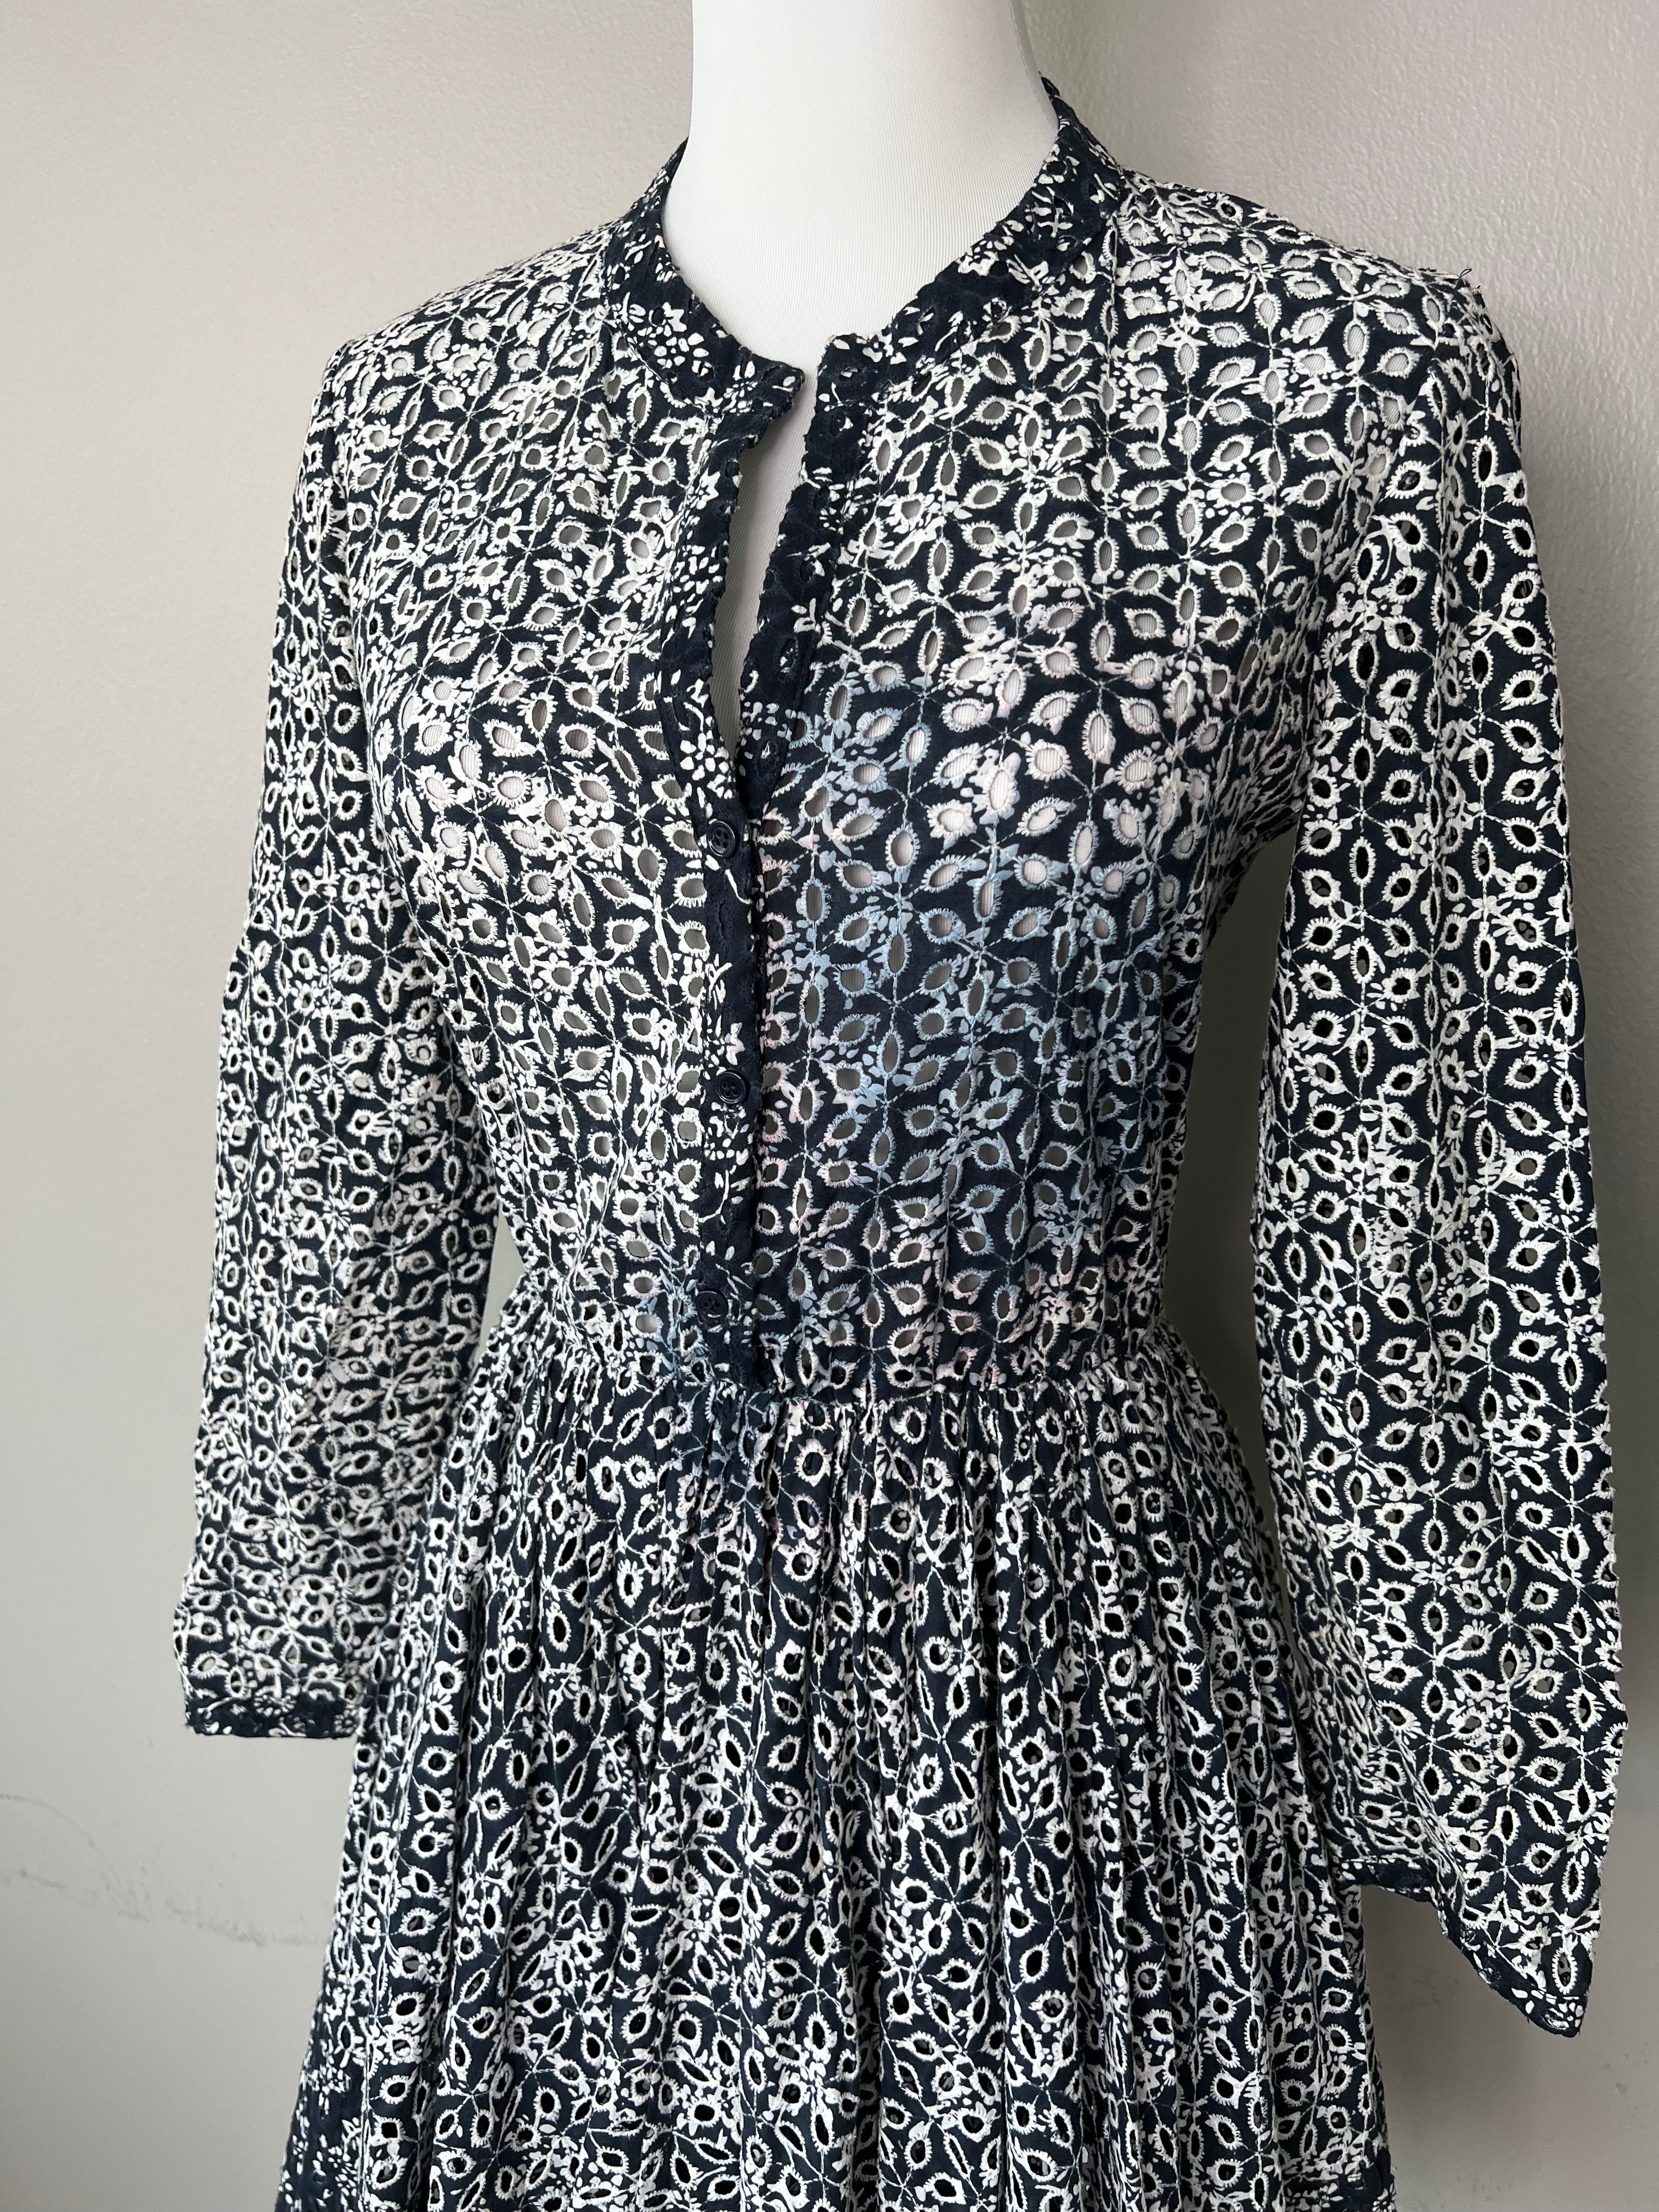 Navy blue A line dress with white floral designs - MAJE